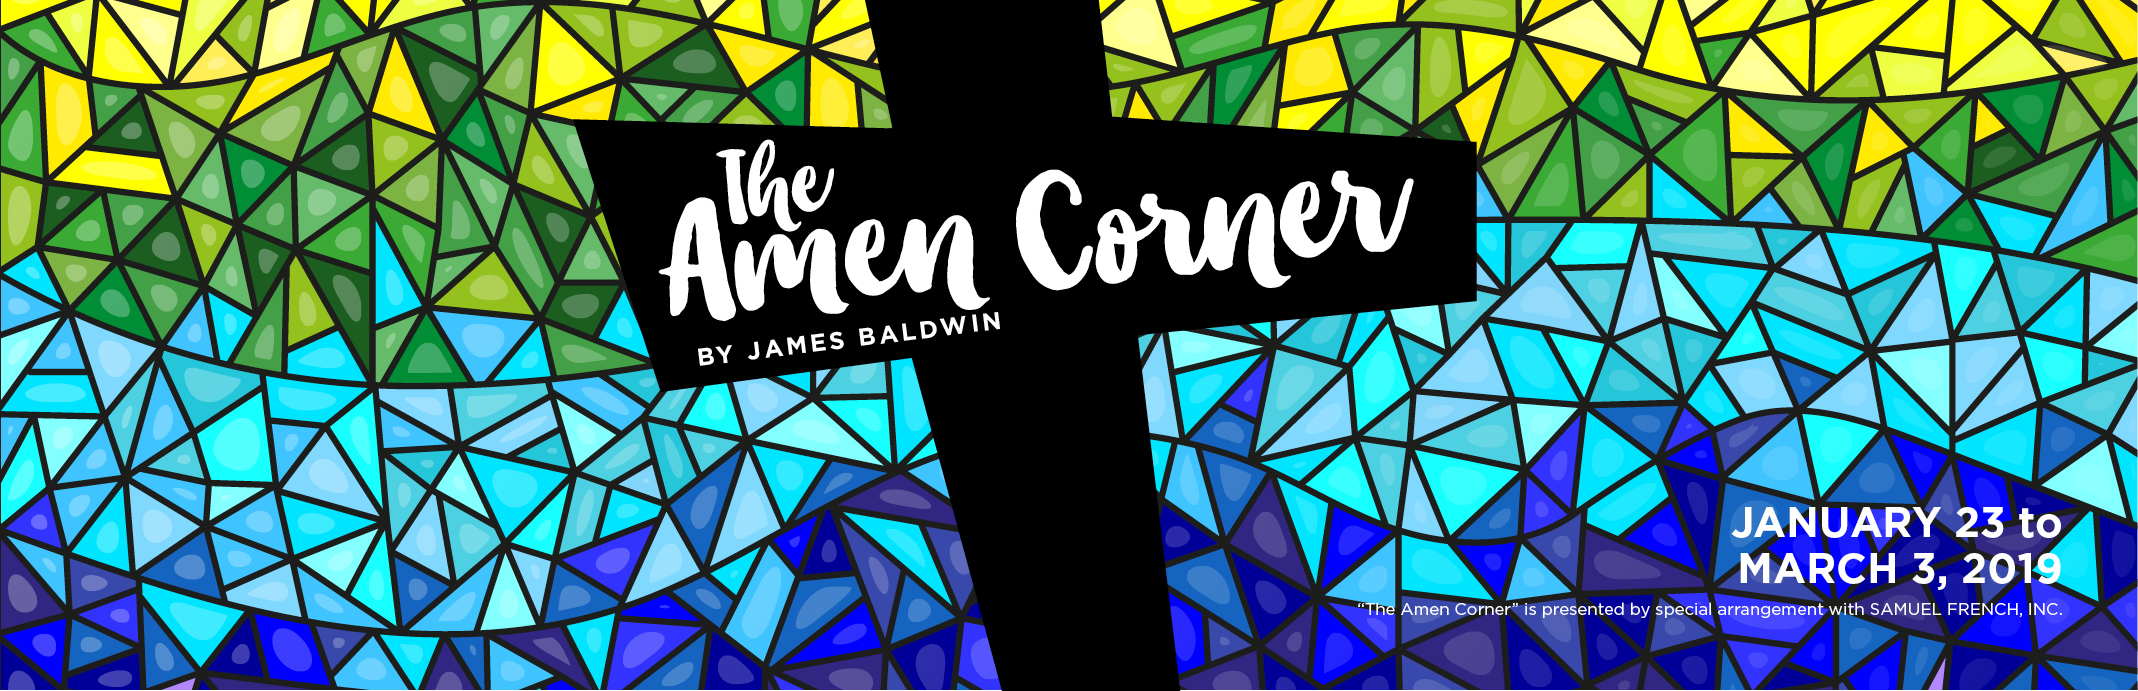 The Amen Corner by James Baldwin January 23 to March 3, 2019 presented by special arrangement with SAMUEL FRENCH, INC.